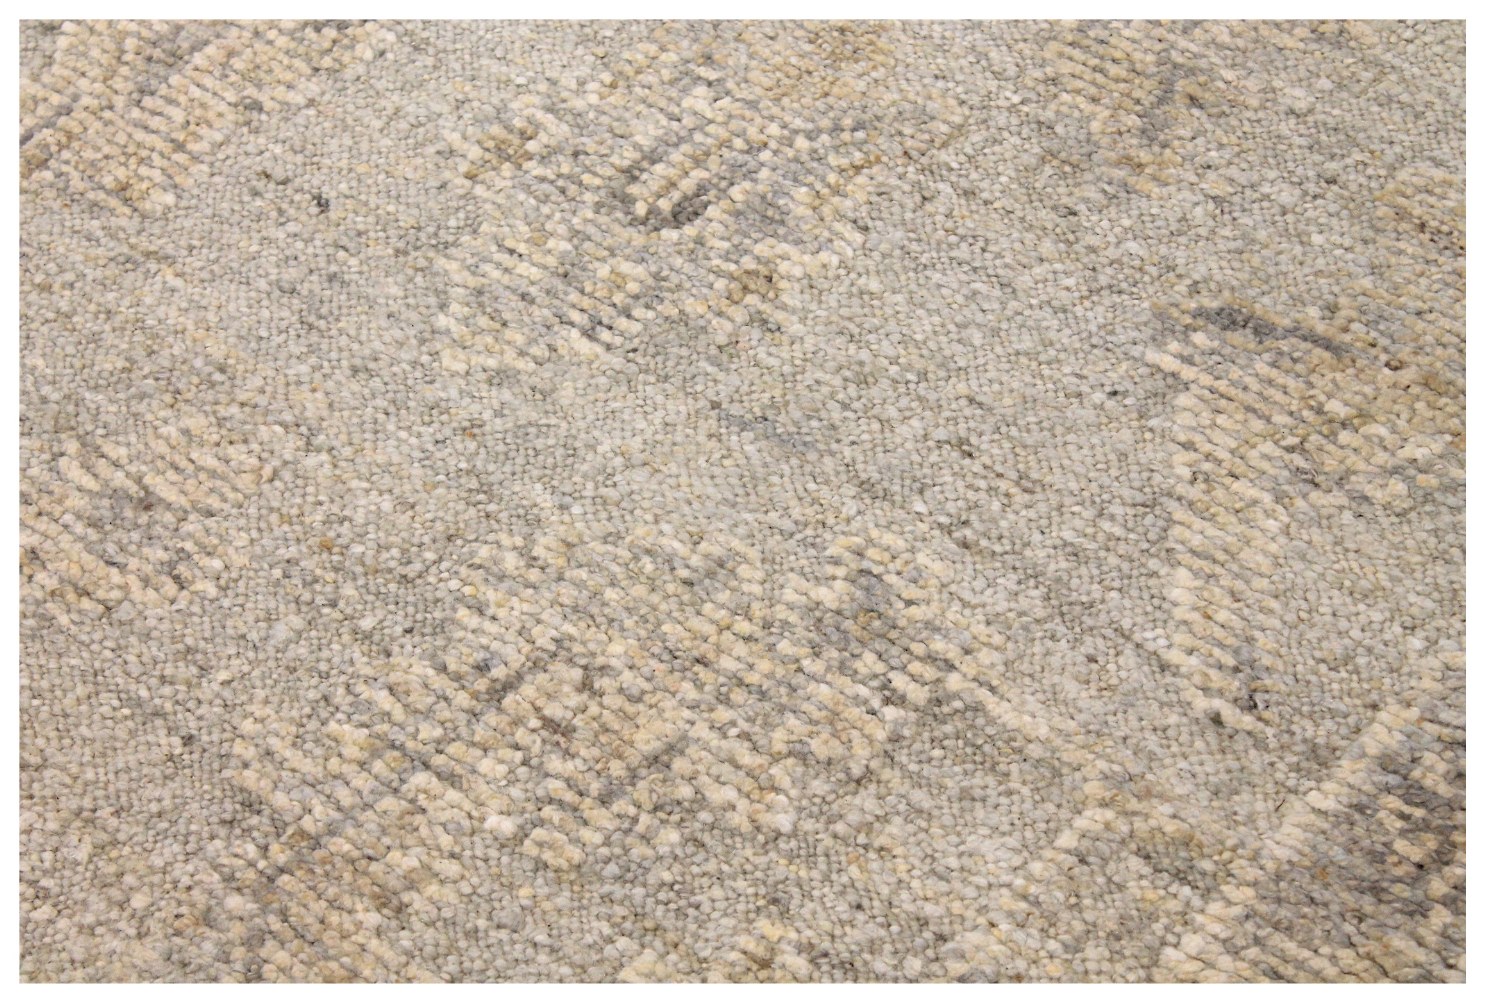 OVERSIZE Oushak Hand Knotted Wool Area Rug - MR028658